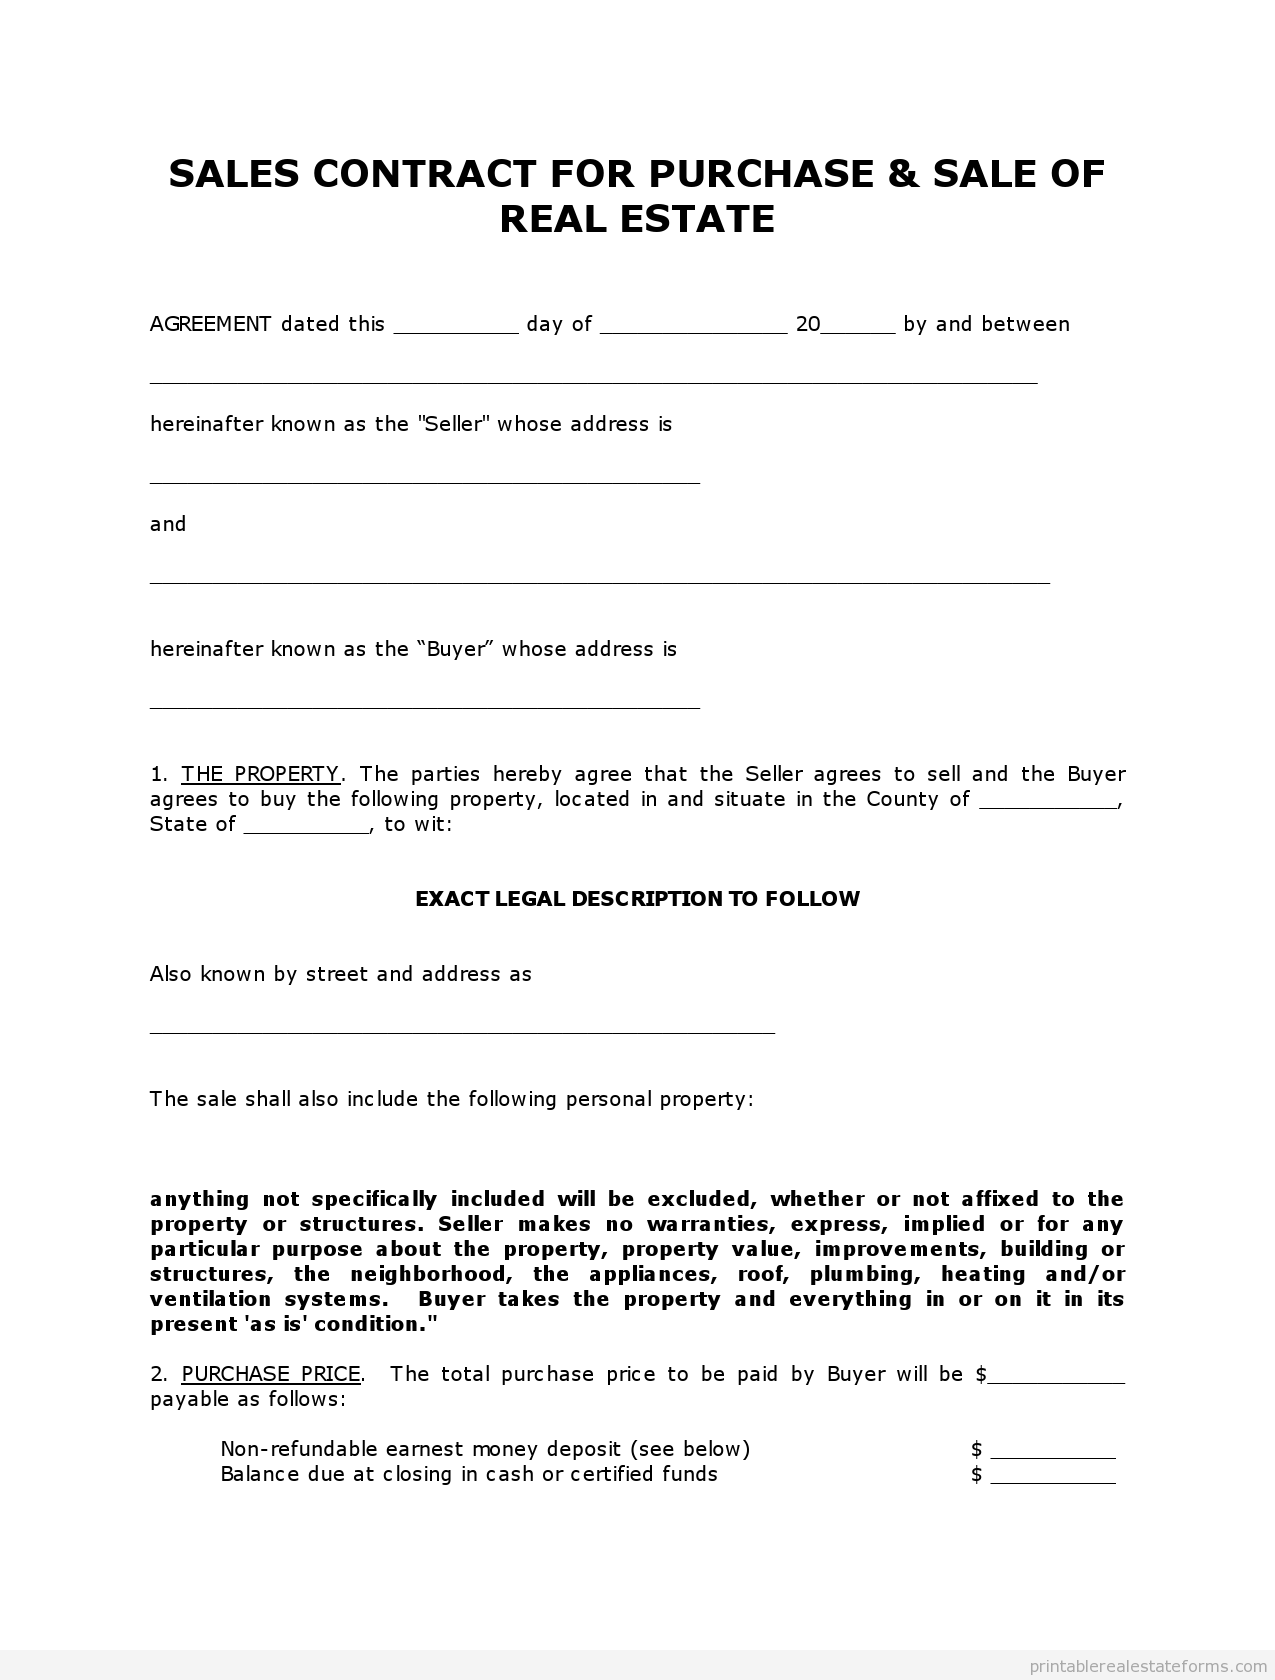 simple-land-purchase-agreement-form-business-mentor